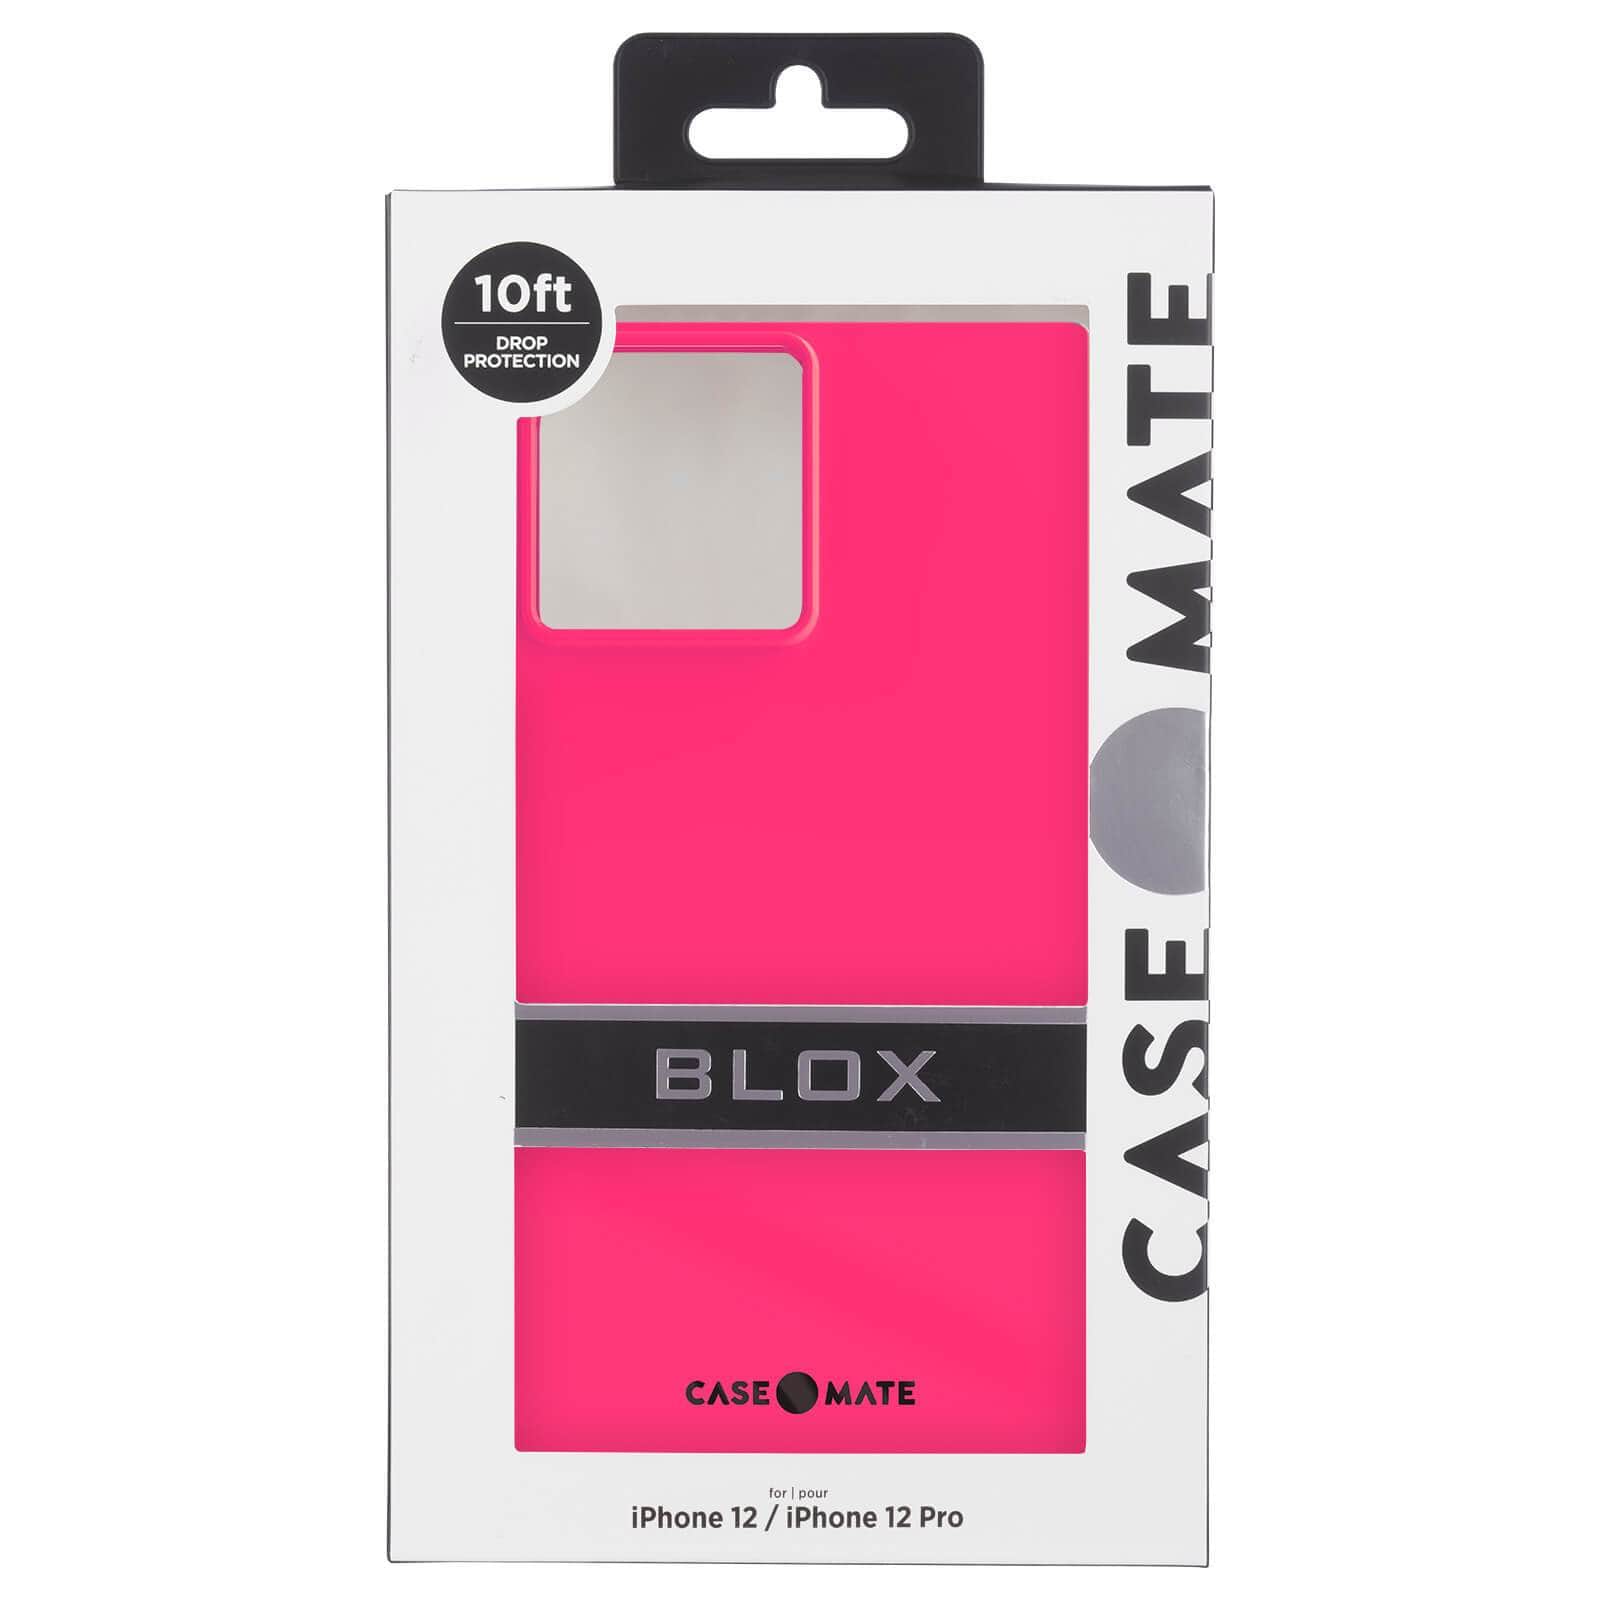 BLOX packaging. 10 ft Drop Protection. Case-Mate BLOX for iPhone 12/ iPhone 12 Pro. color::Hot Pink